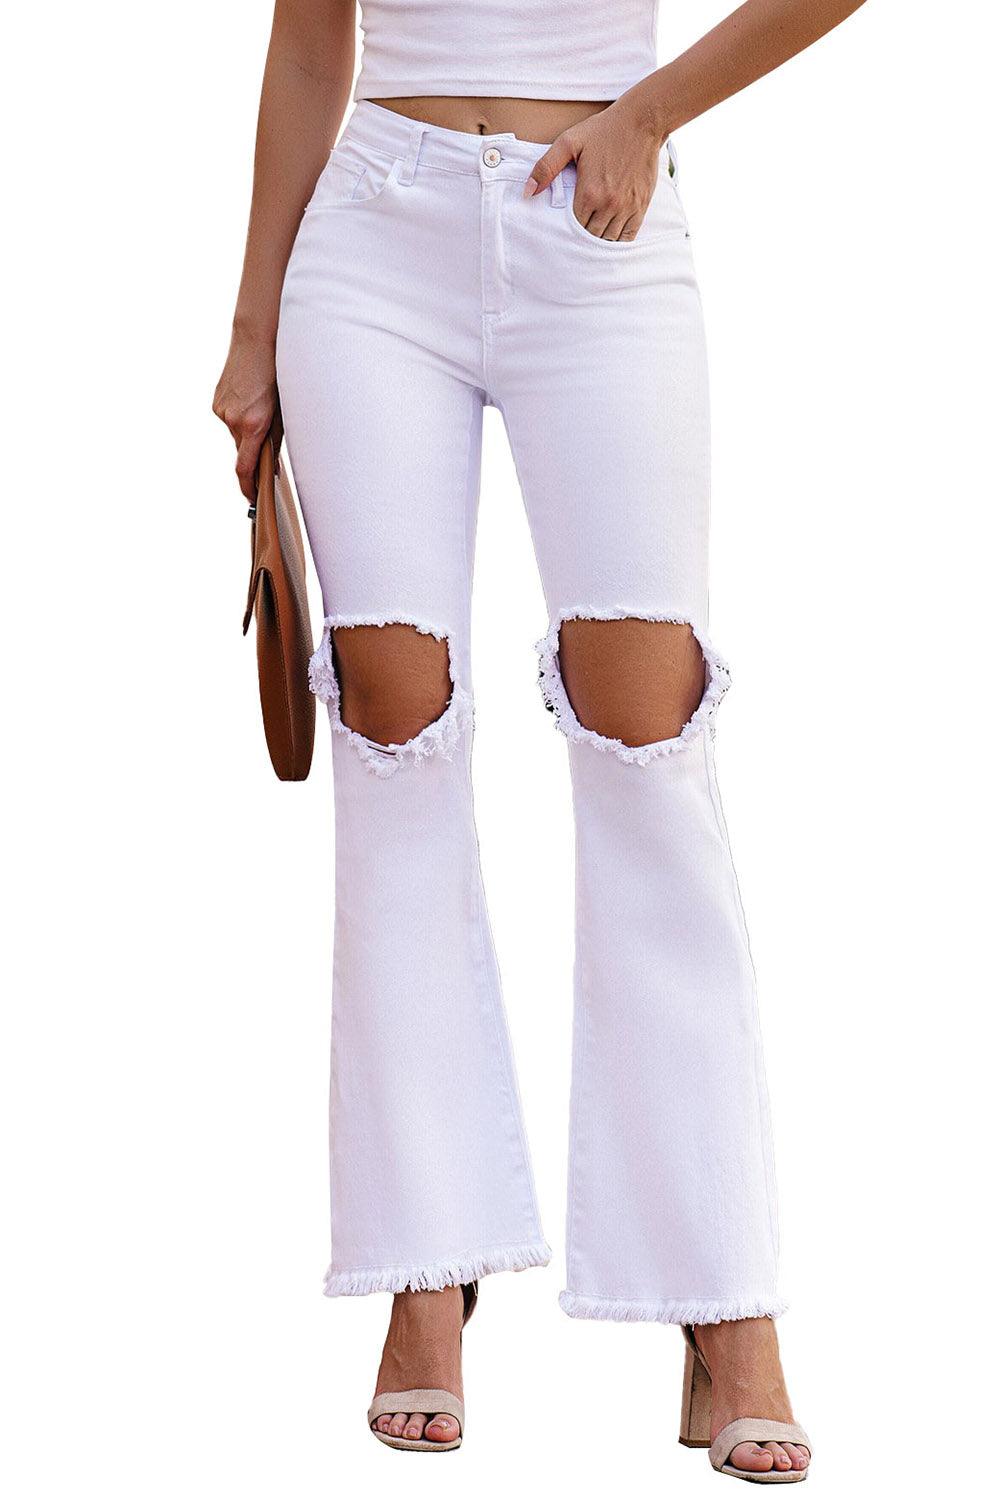 White Casual Ripped Raw Hem Flare Jeans - Vesteeto